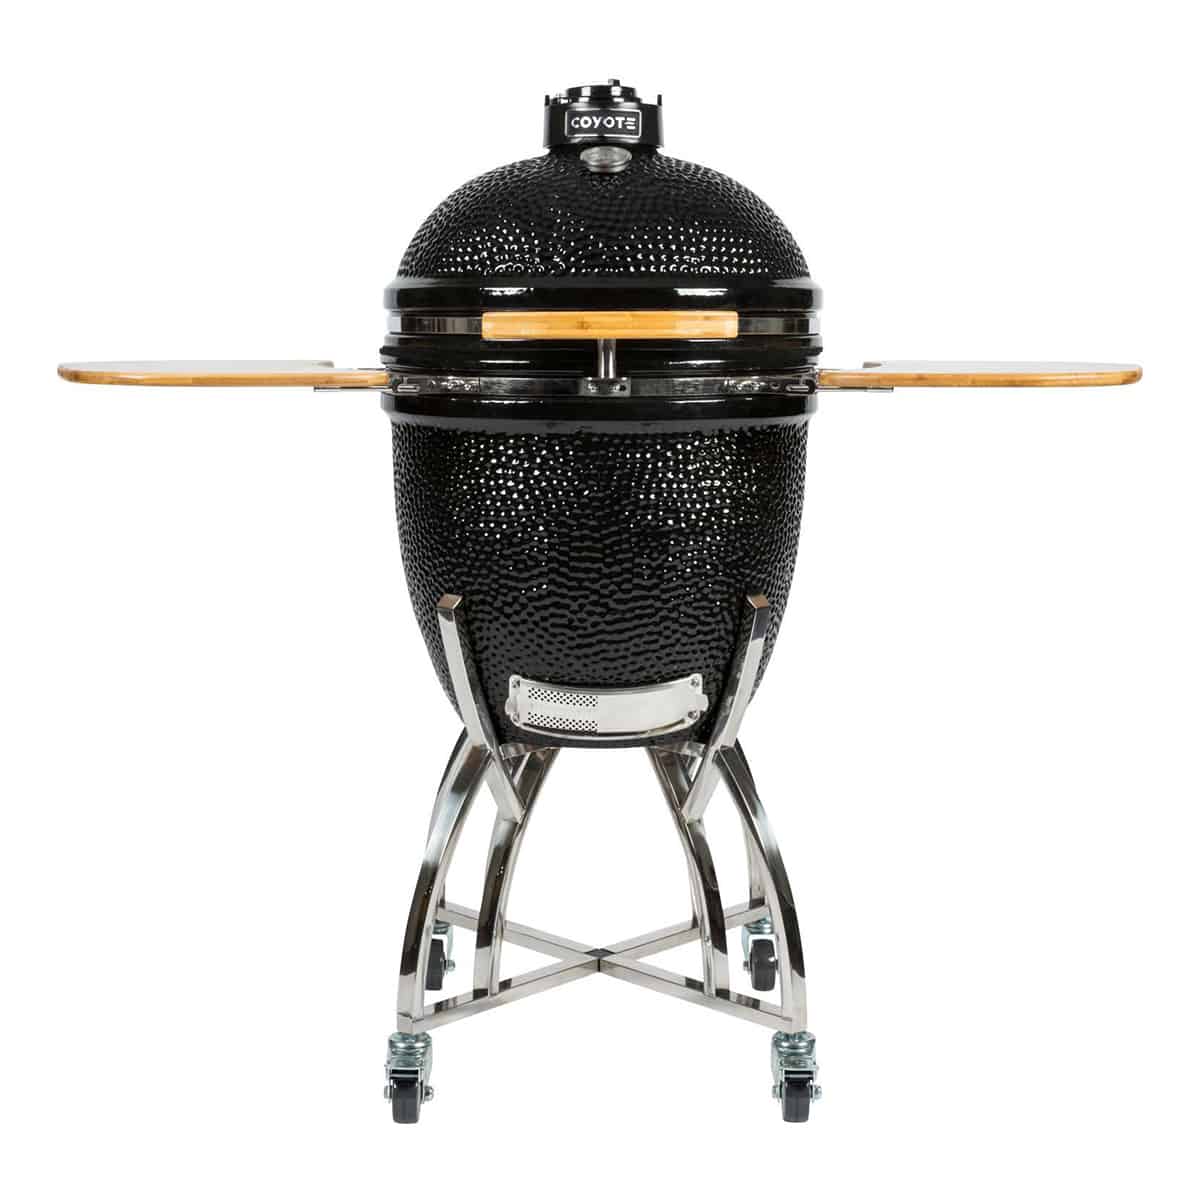 Coyote Asado Smoker with Stand and Side Shelves Ceramic Grill